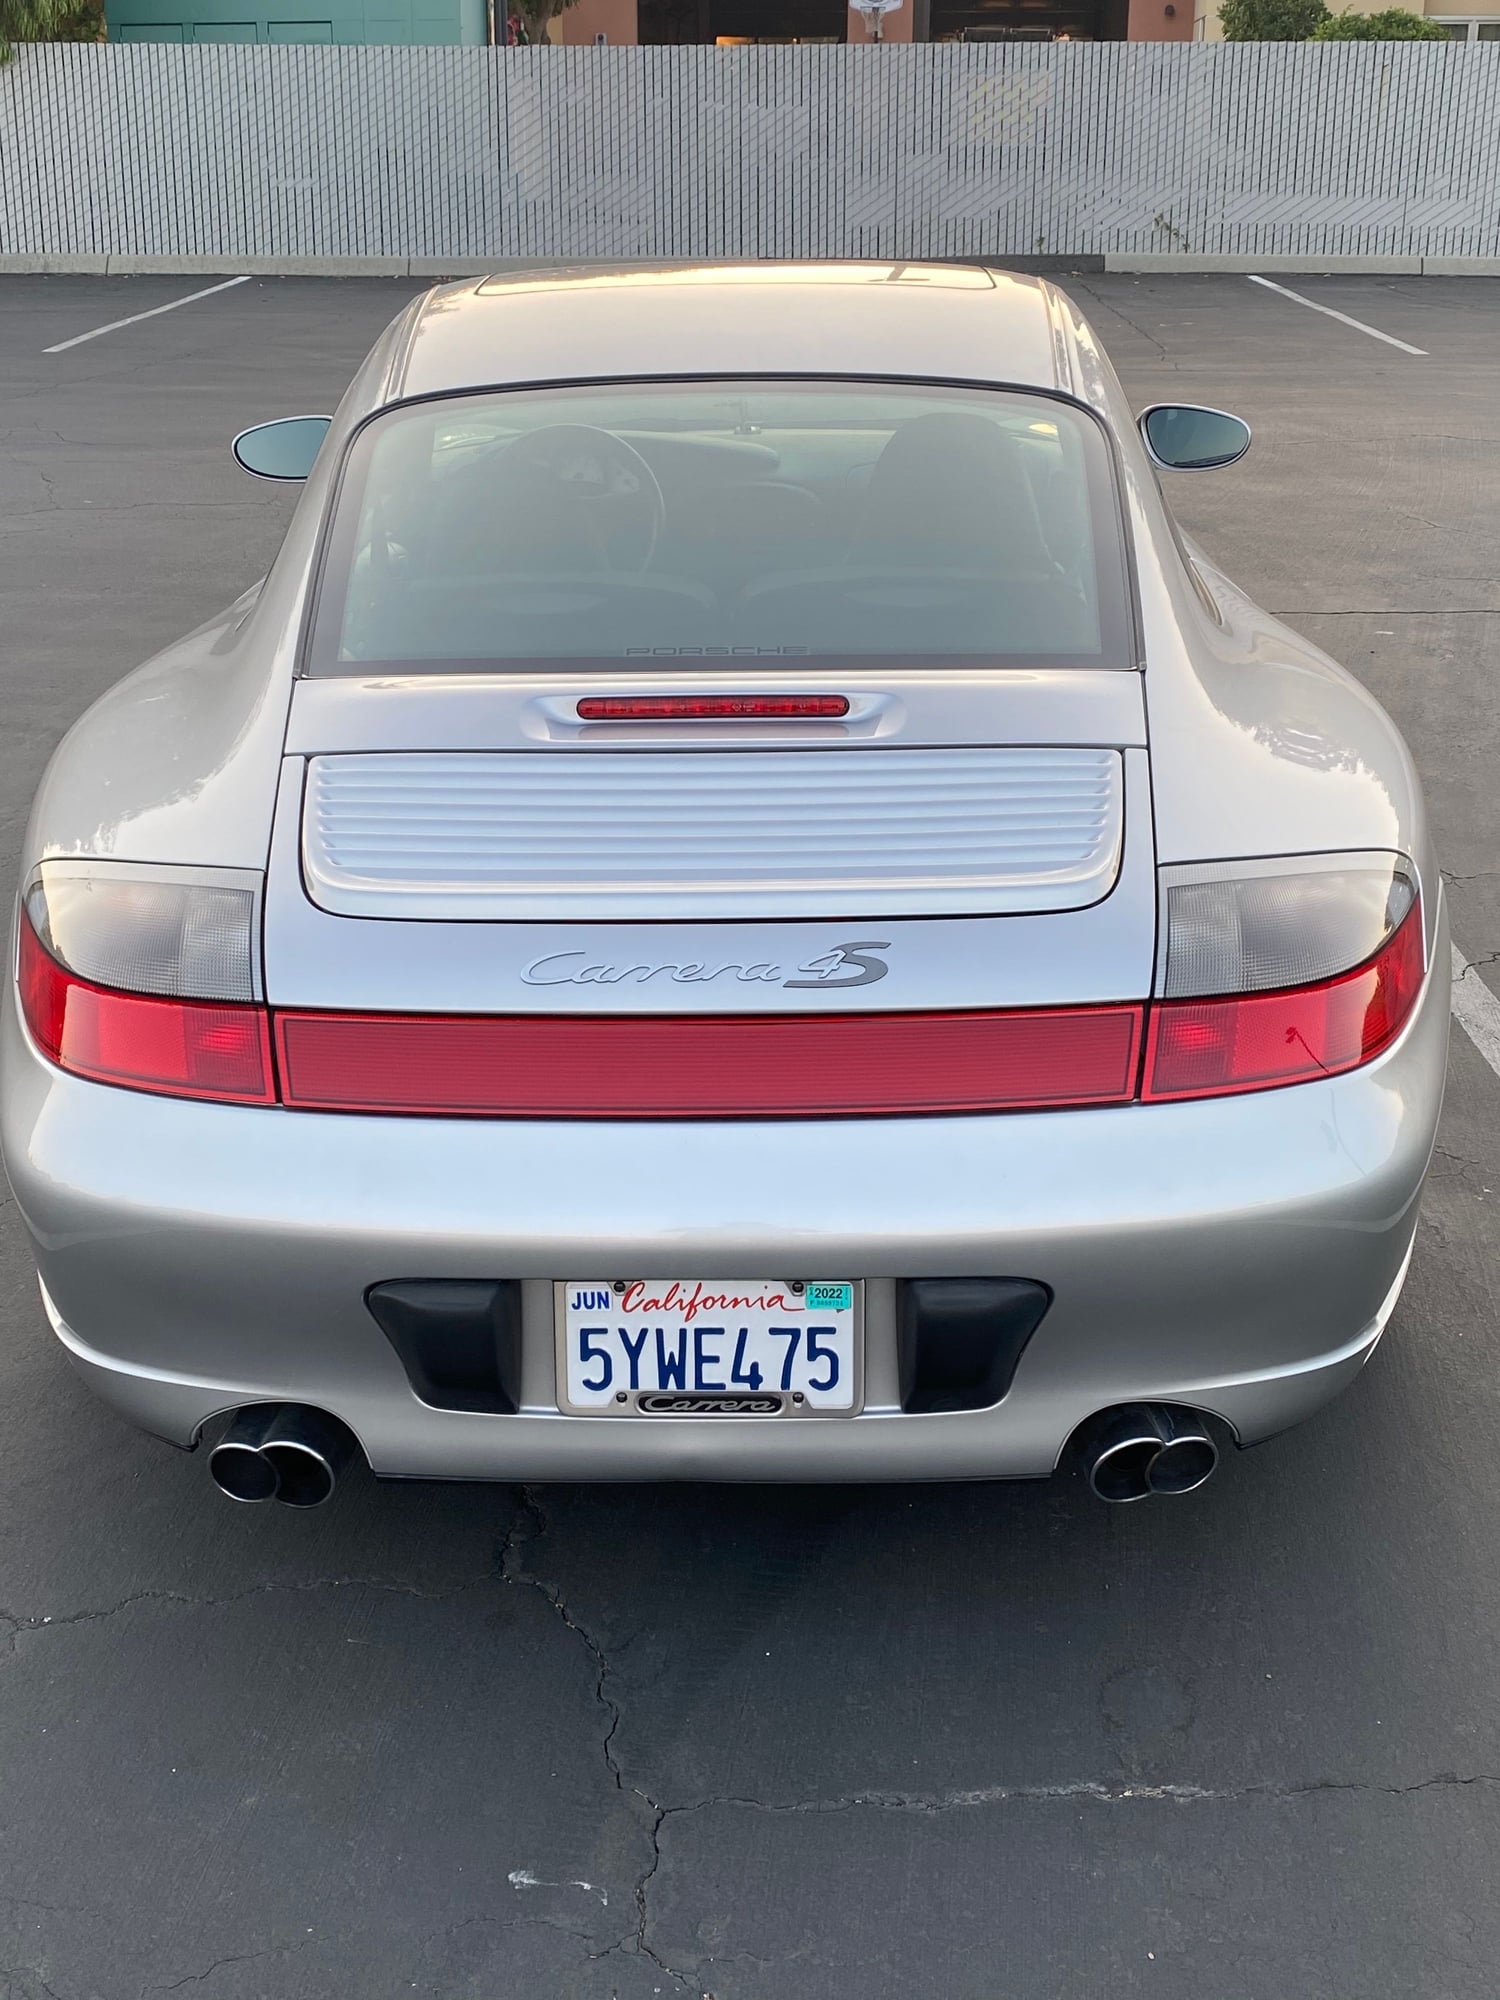 2003 Porsche 911 - 2003 Porsche 911 C4S 29k miles 6 speed - Used - VIN WP0AA29553S623329 - 29,700 Miles - 6 cyl - 4WD - Manual - Coupe - Silver - San Jose, CA 95123, United States